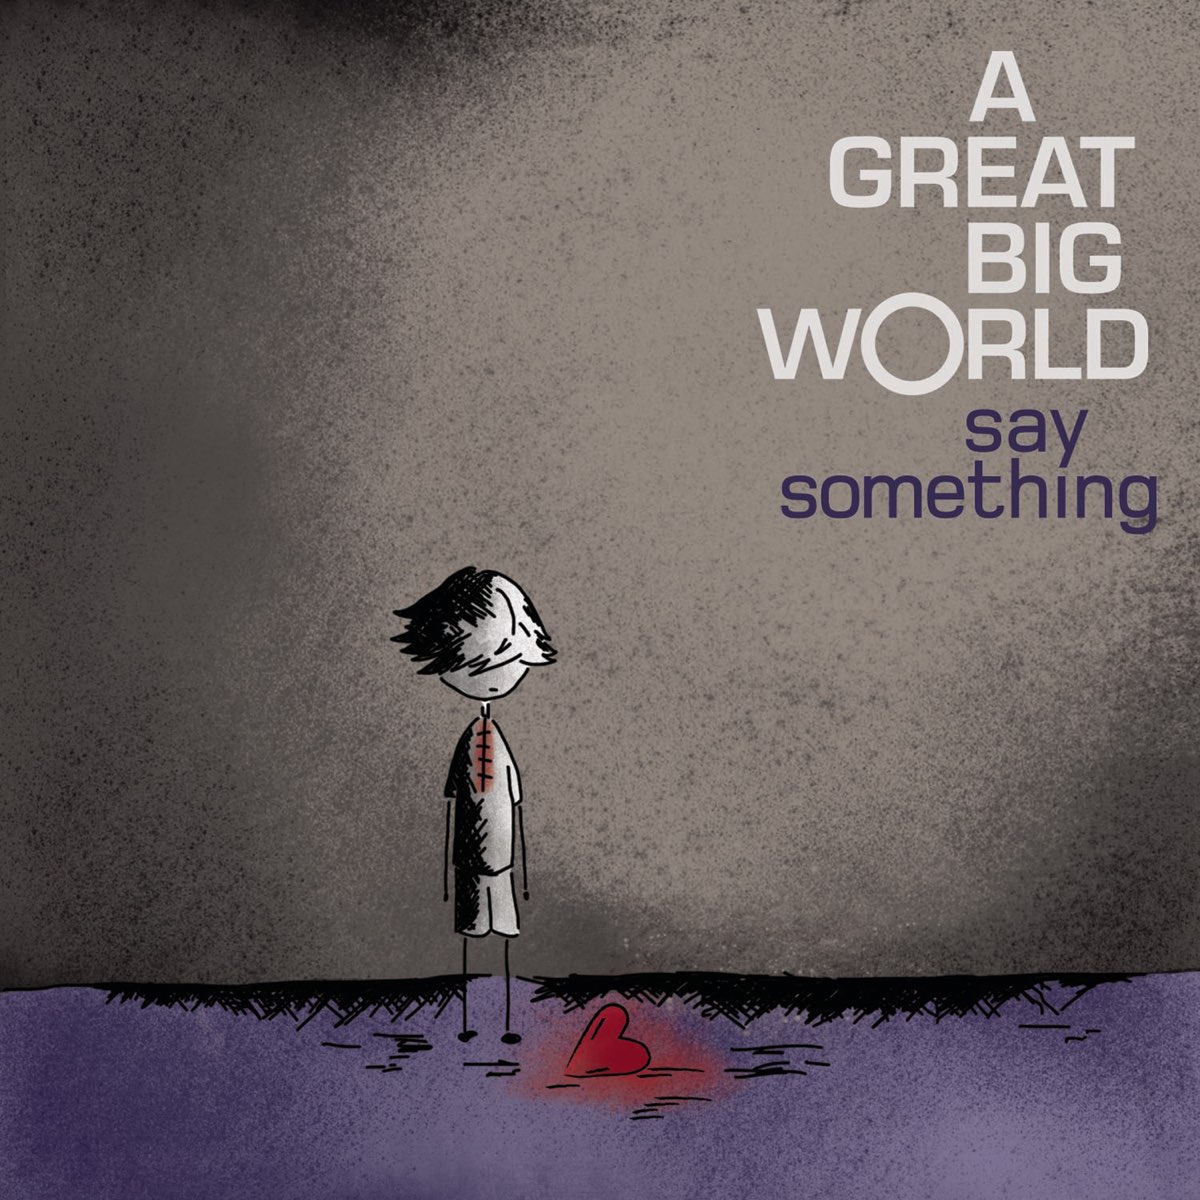 A world of something. A great big World say something. A great big World. A great big World Christina Aguilera.